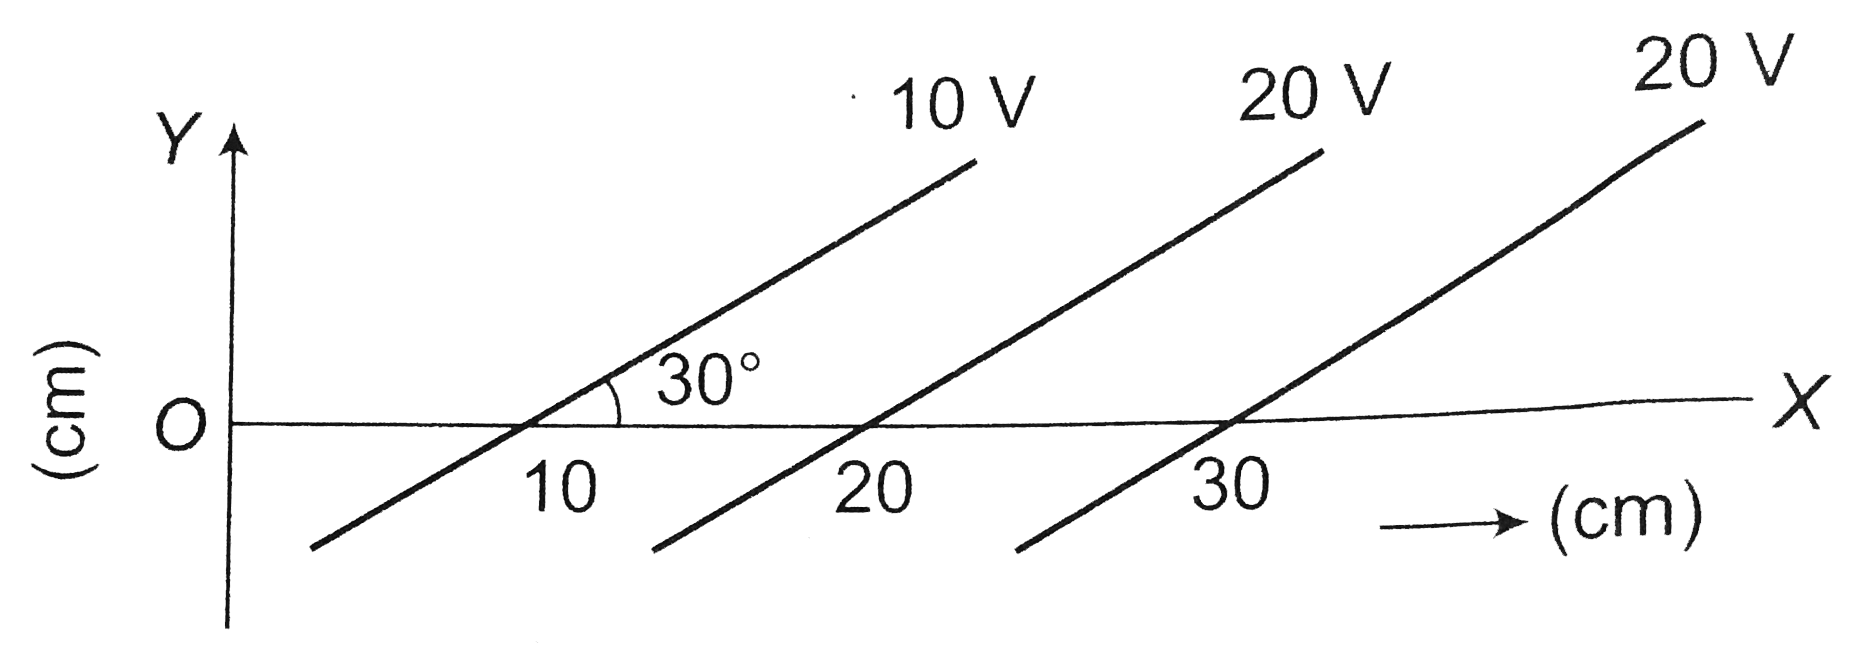 Equipotential surfaces are shown in figure. Then the electric field strength will be